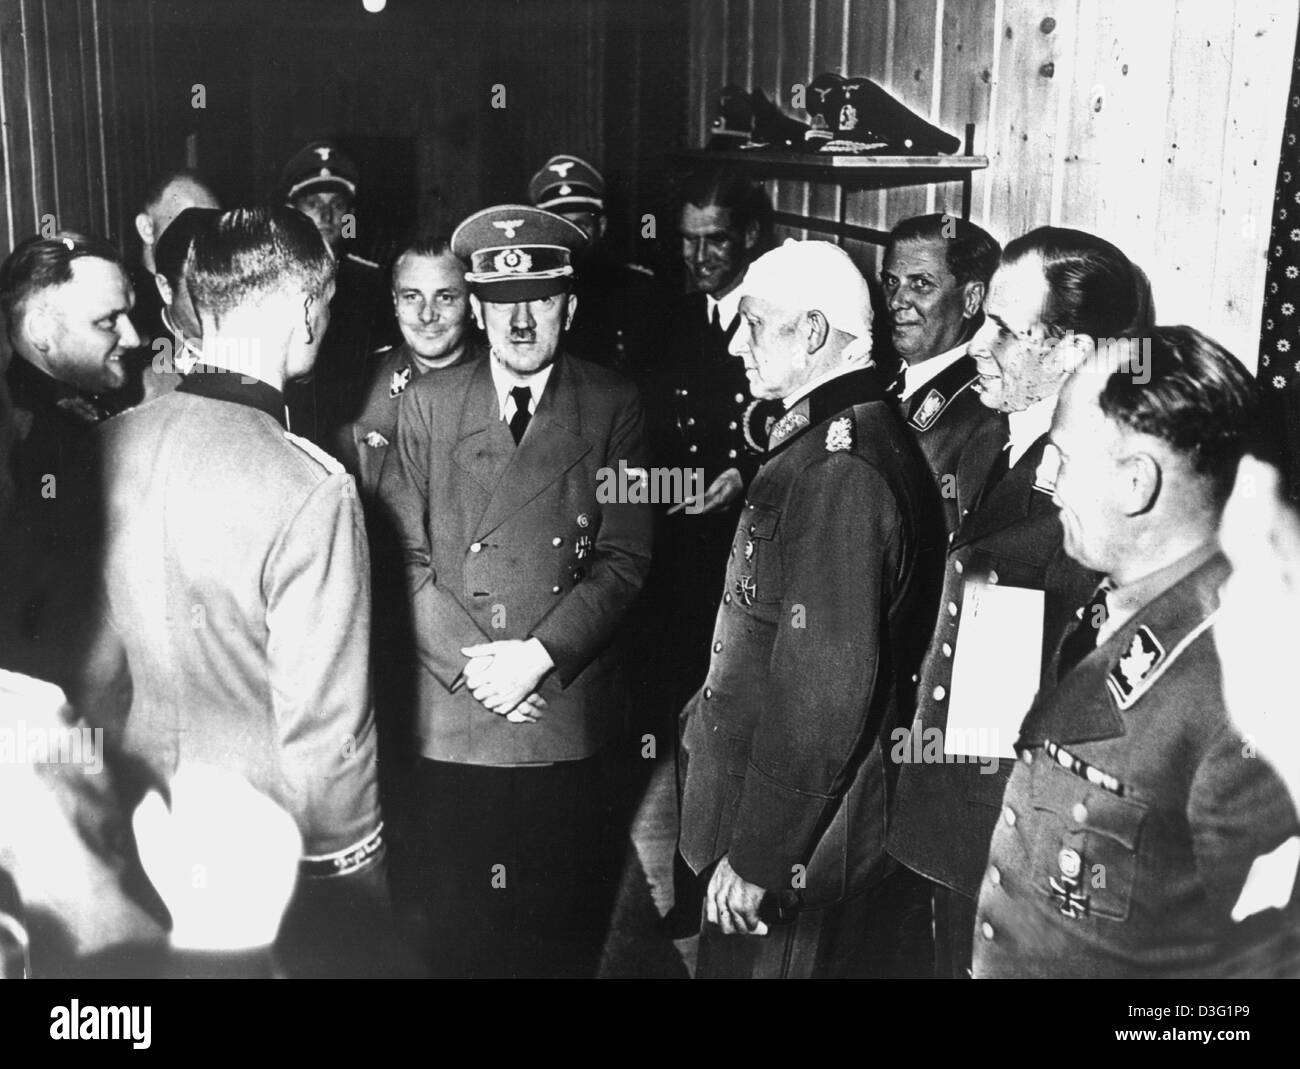 (dpa files) - The picture shows Adolf Hitler standing surrounded by officers after a failed assissination attempt in the bunker at the command headquarters in Rastenburg, Germany, 20 July 1944. To the left behind Hitlaer stands his adjutant Martin Bormann and to the right stands Chief of Army Operations General Alfred Jodl with a bandage around his head. Stock Photo